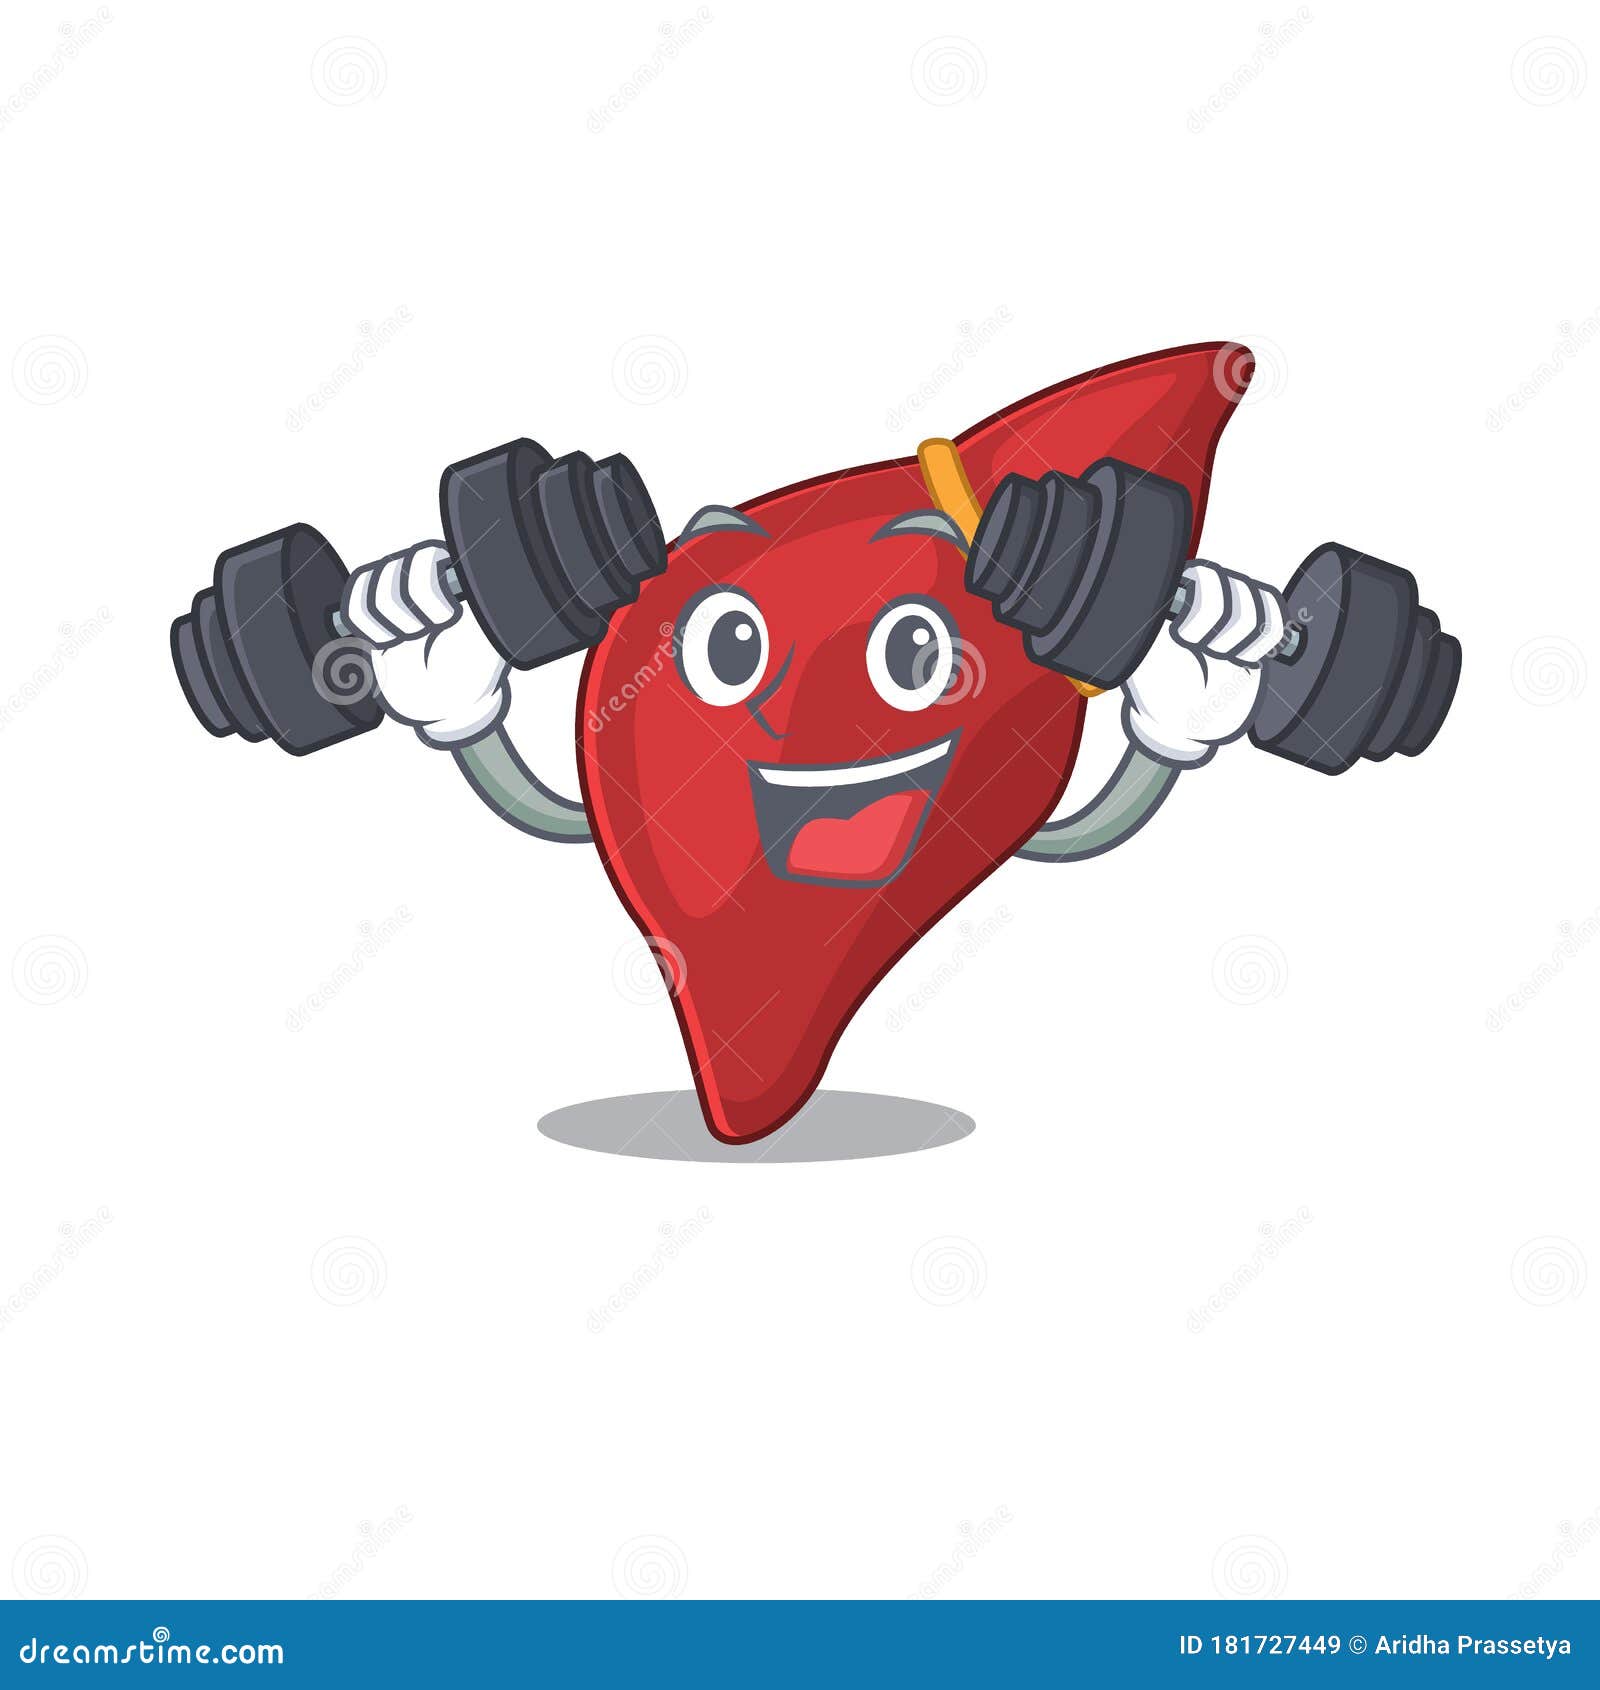 Mascot Design of Smiling Fitness Exercise Healthy Human Liver Lift Up ...